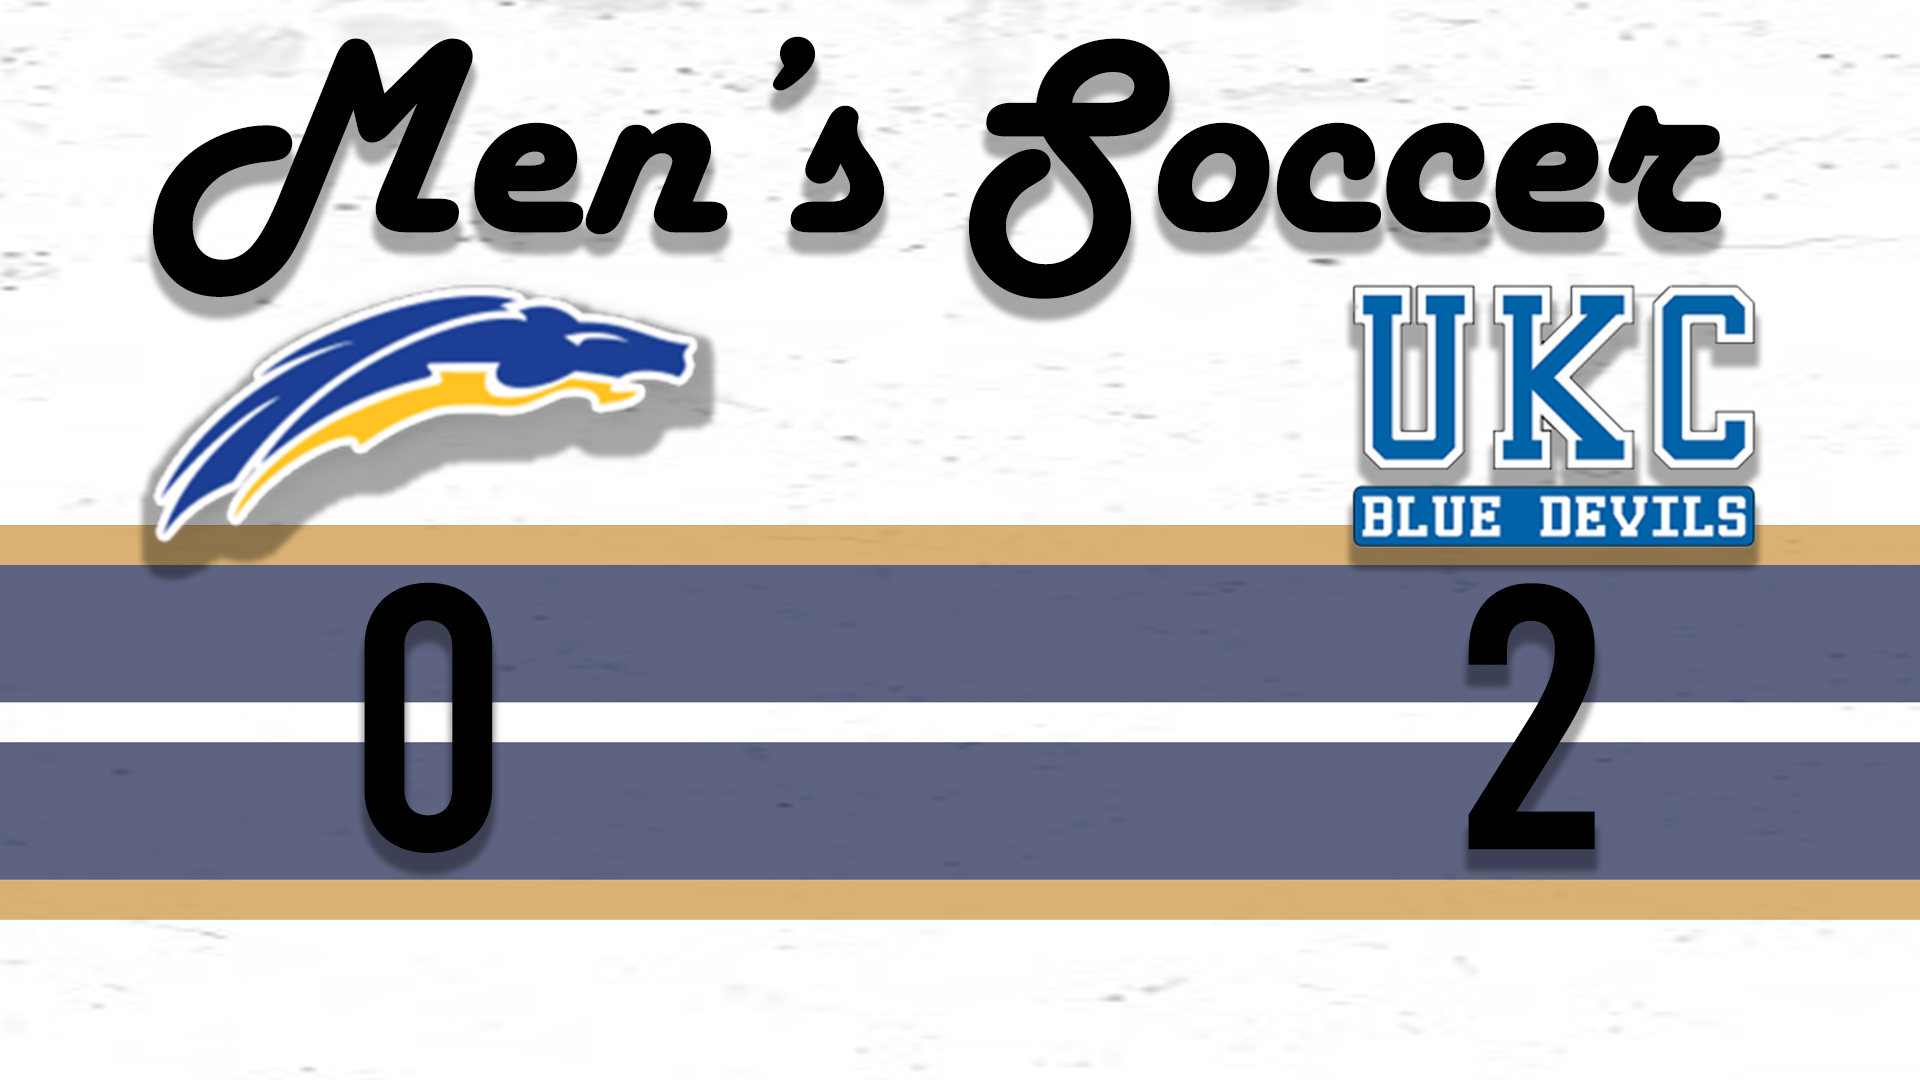 UKC Blank Chargers 2-0 in Home Opener